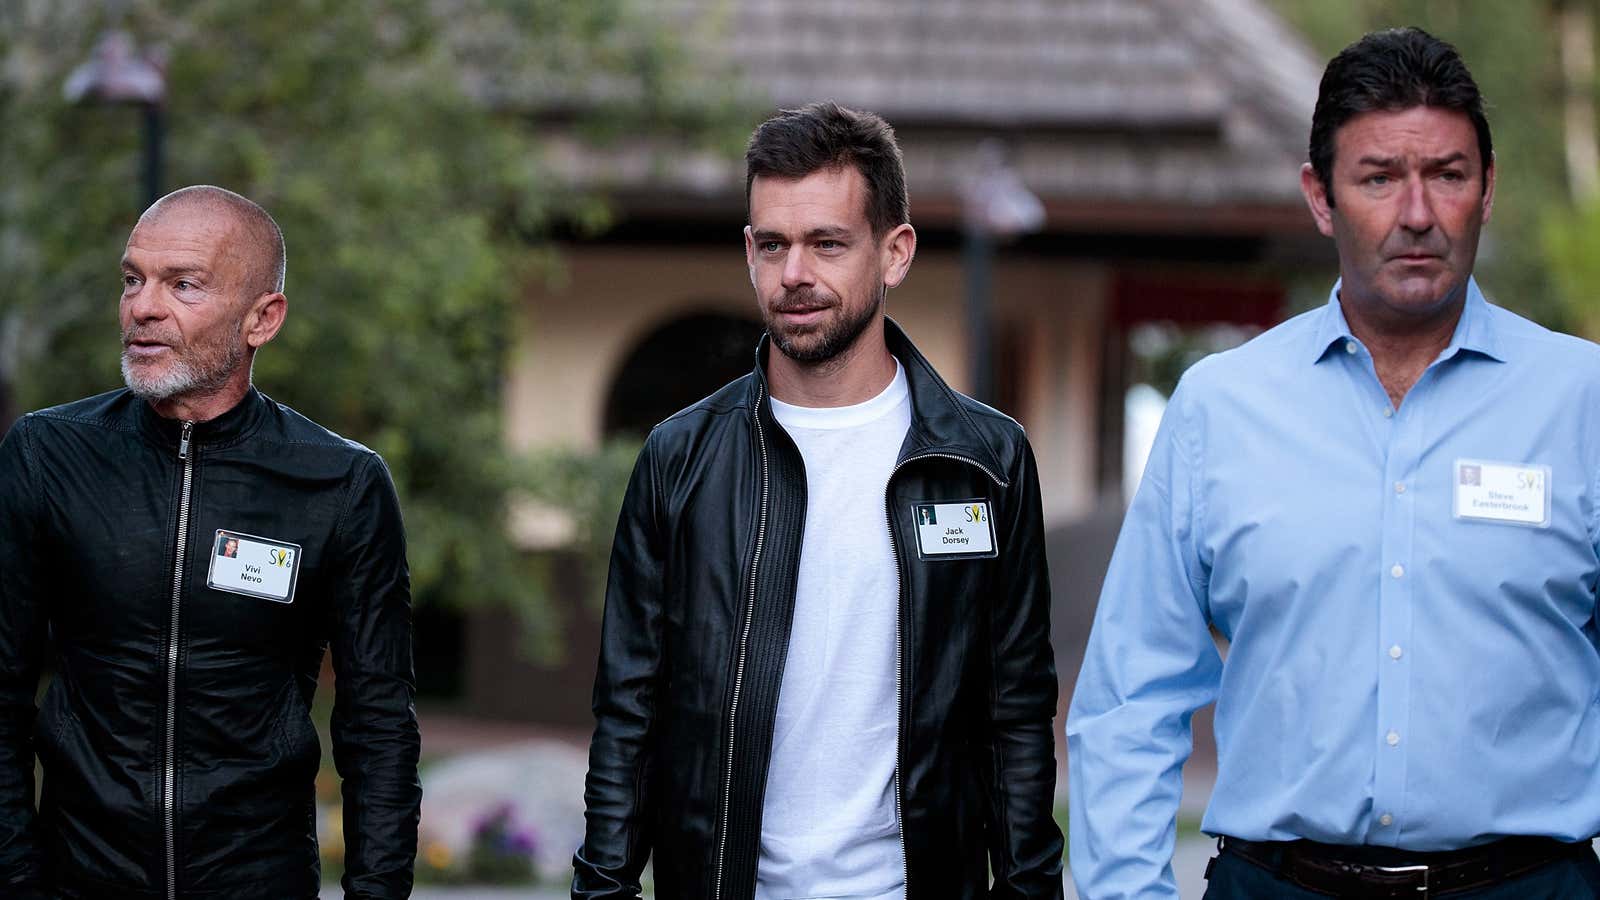 The top and bottom of the CEO pay ratio: former McDonalds CEO Steve Easterbrook (right) and Twitter CEO Jack Dorsey (middle).